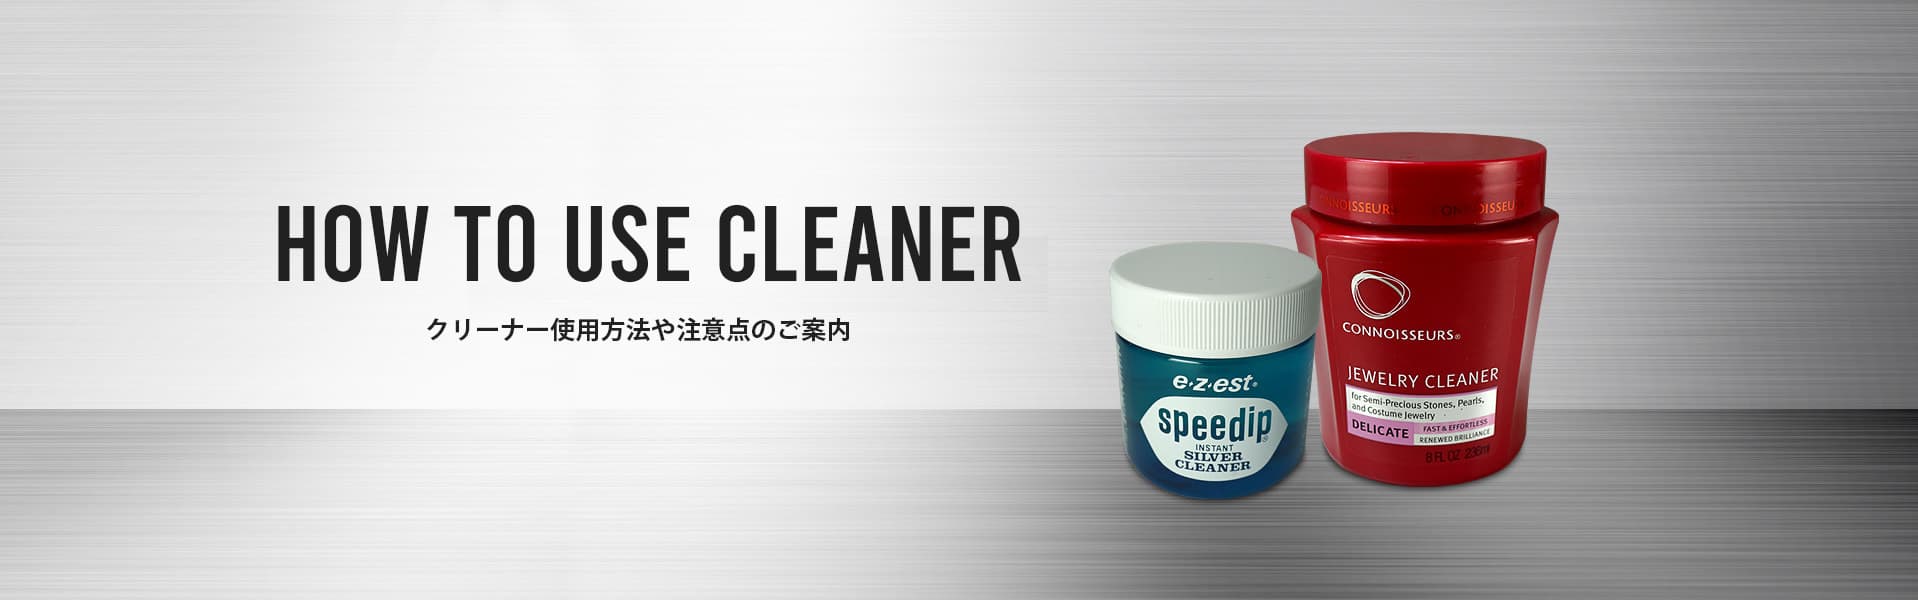 how to use cleaner